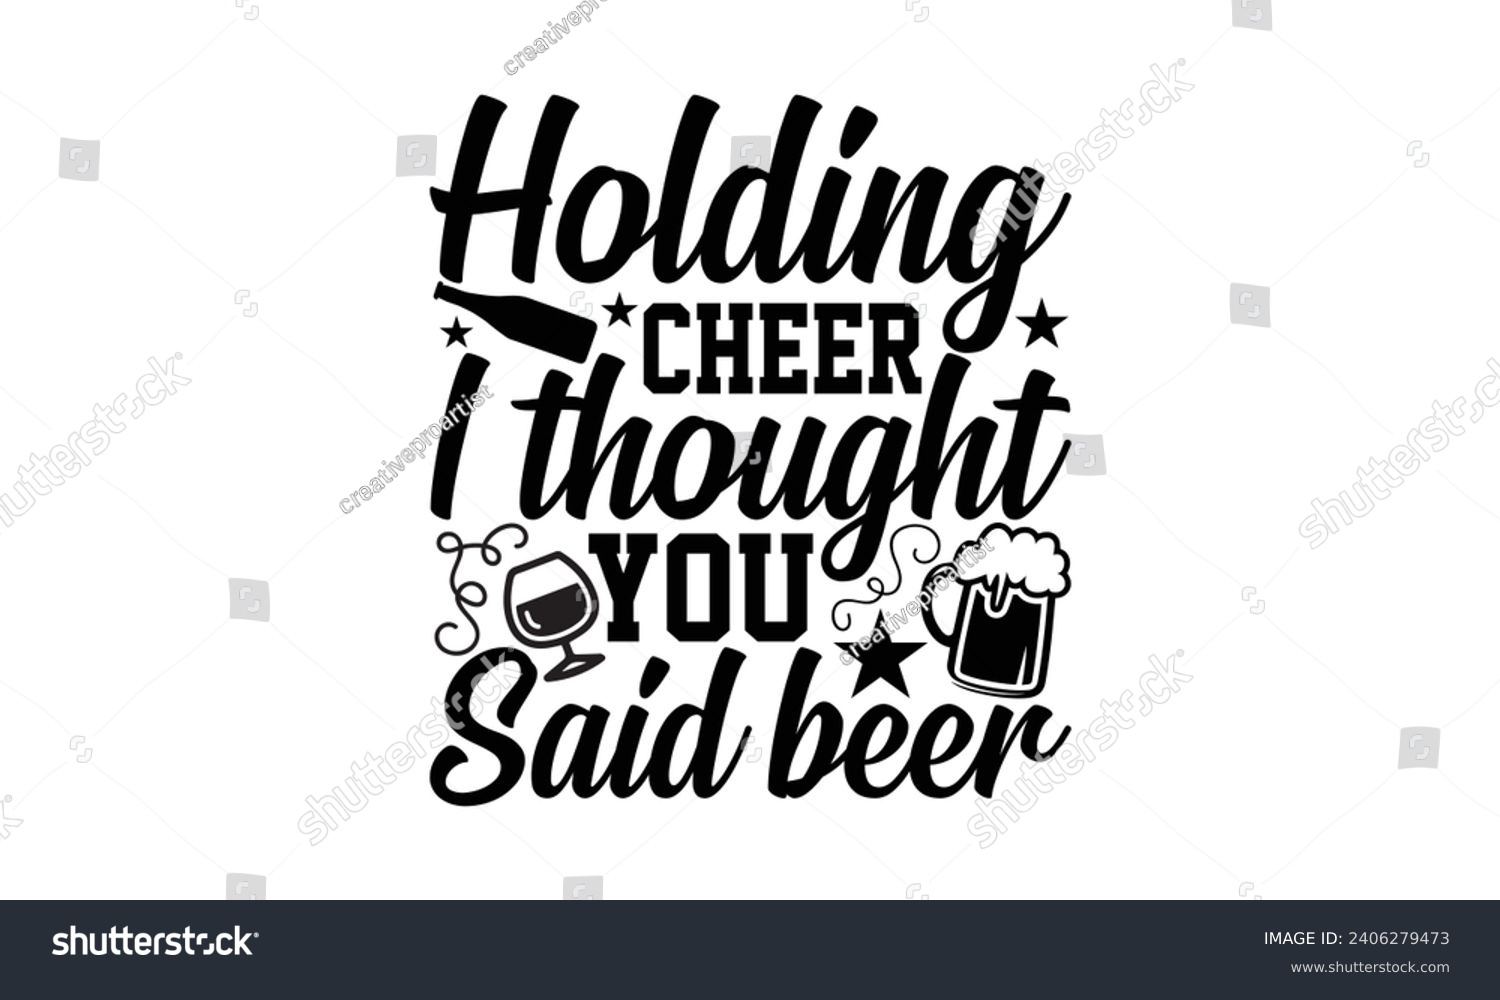 SVG of Holding Cheer I Thought You Said Beer- Beer t- shirt design, Handmade calligraphy vector illustration for Cutting Machine, Silhouette Cameo, Cricut, Vector illustration Template. svg